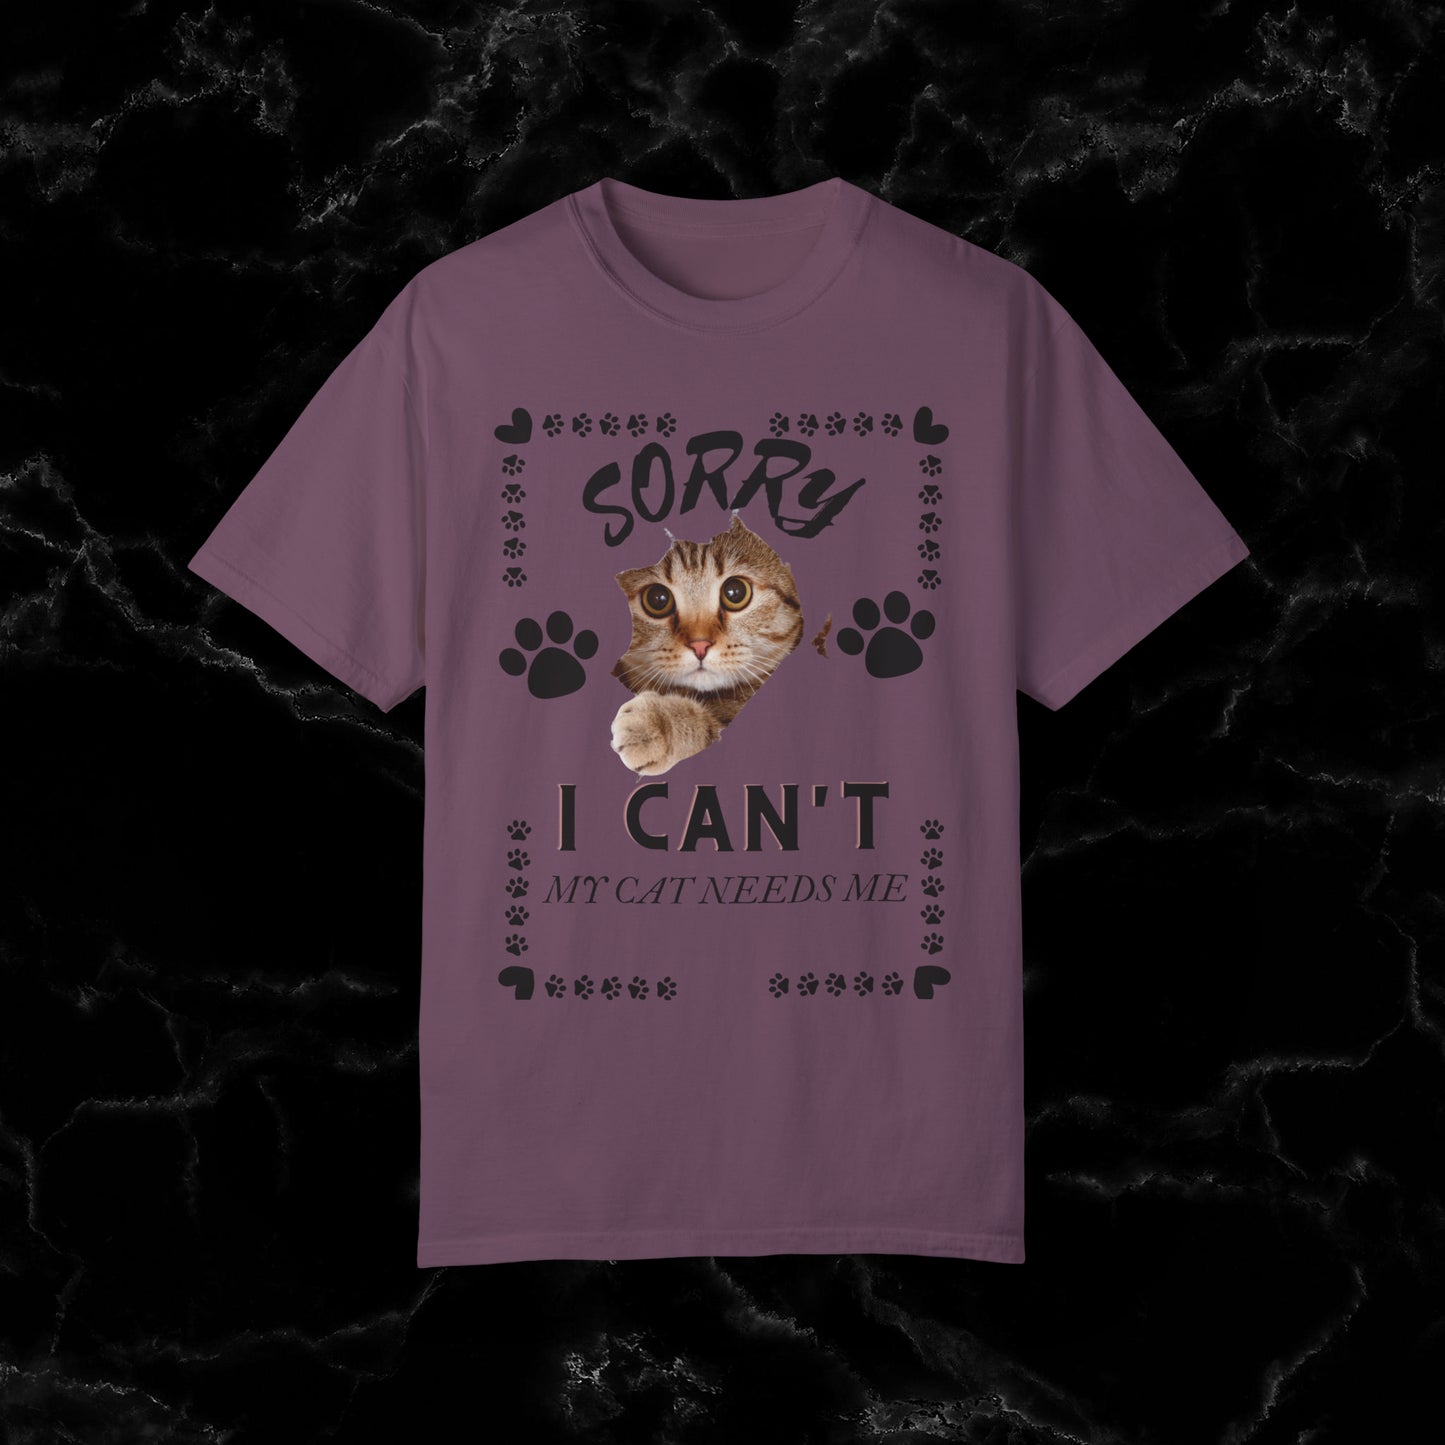 Sorry I Can't, My Cat Needs Me T-Shirt - Perfect Gift for Cat Moms and Animal Lovers T-Shirt Berry S 